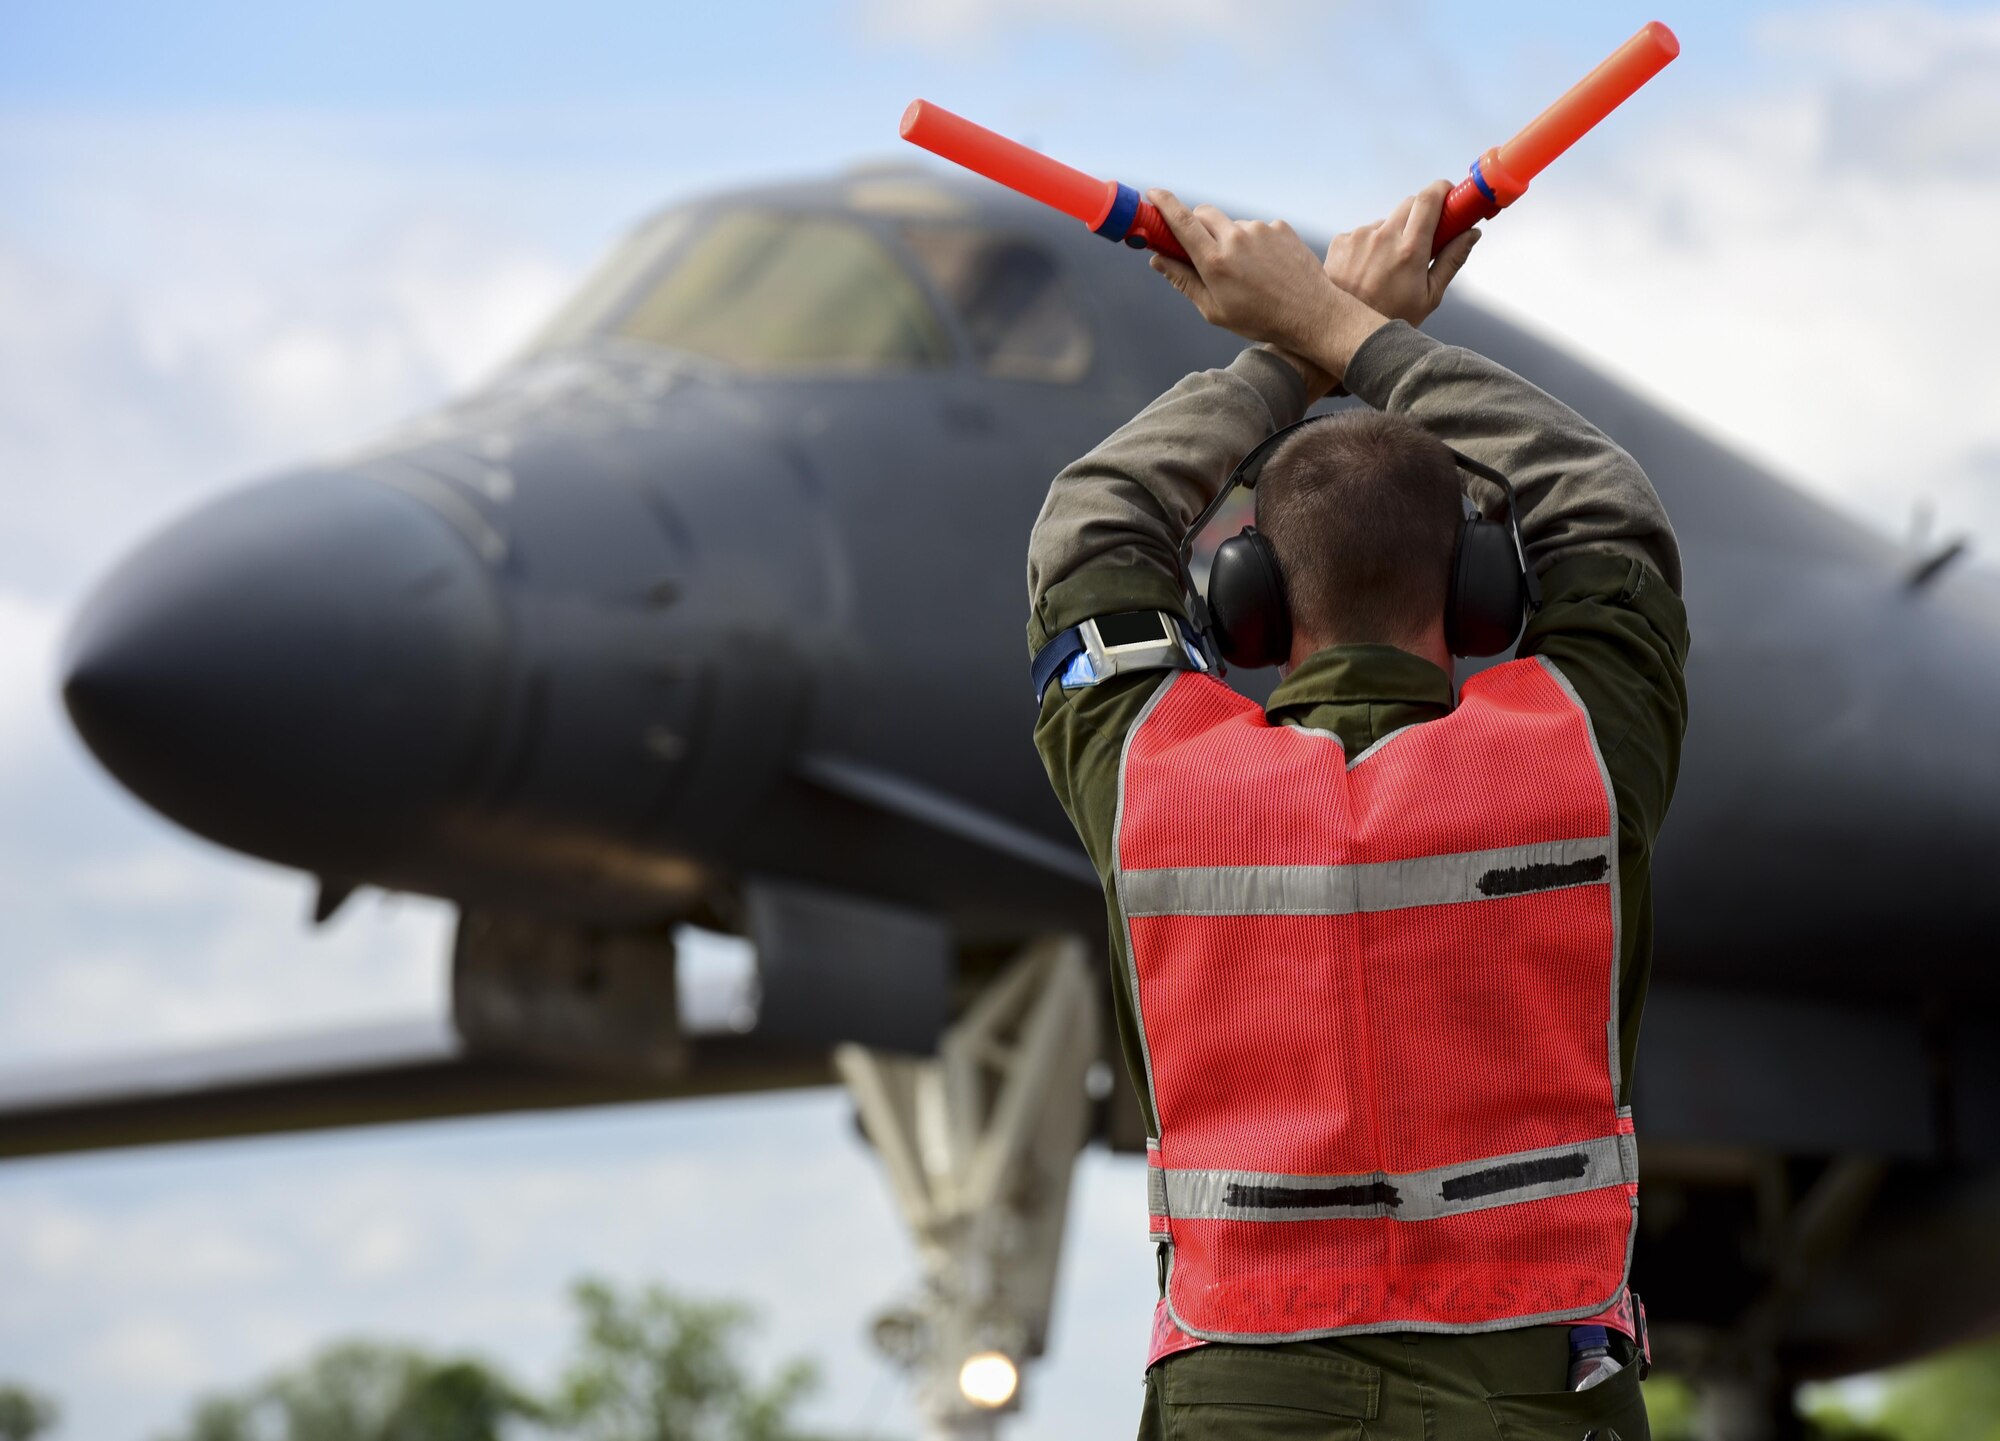 U.S. Air Force Airman 1st Class Jacob Feeback, 28th Aircraft Maintenance Squadron crew chief, marshals in a B-1B Lancer from Ellsworth Air Force Base at Royal Air Force Fairford, U.K., June 7, 2017. Airmen from the 28th Aircraft Maintenance Squadron are supporting bomber assurance and deterrence missions in the European theatre that combine training opportunities and greatly improve interoperability among participating NATO allies and regional partners. (U.S. Air Force photo by Airman 1st Class Randahl J. Jenson)